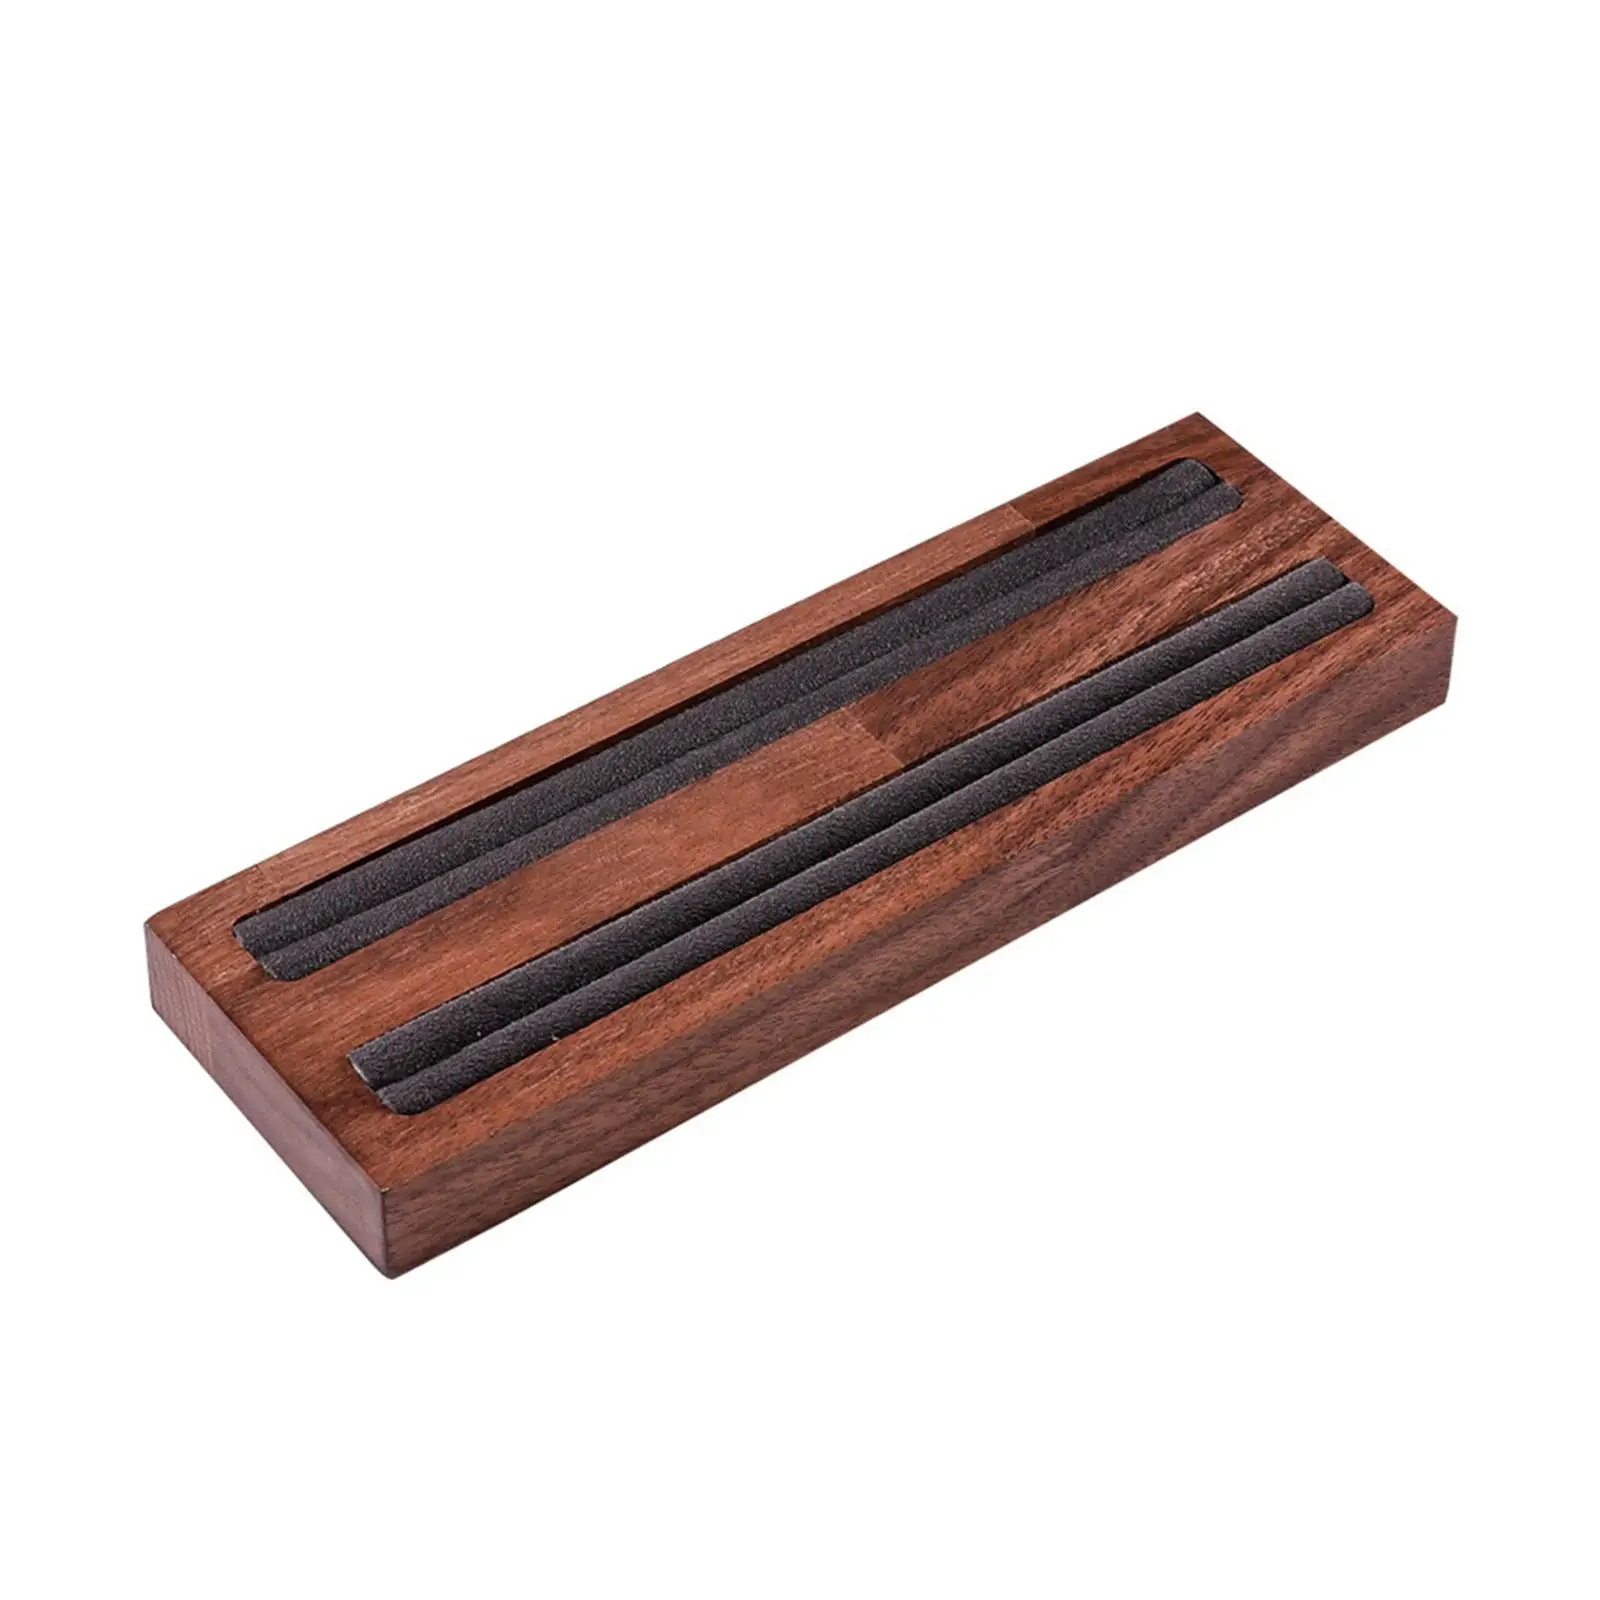 Wooden Rings Display Stand Organizer Display Holder Storage Jewelry Organizer Case for Shop Showcase Store Gifts